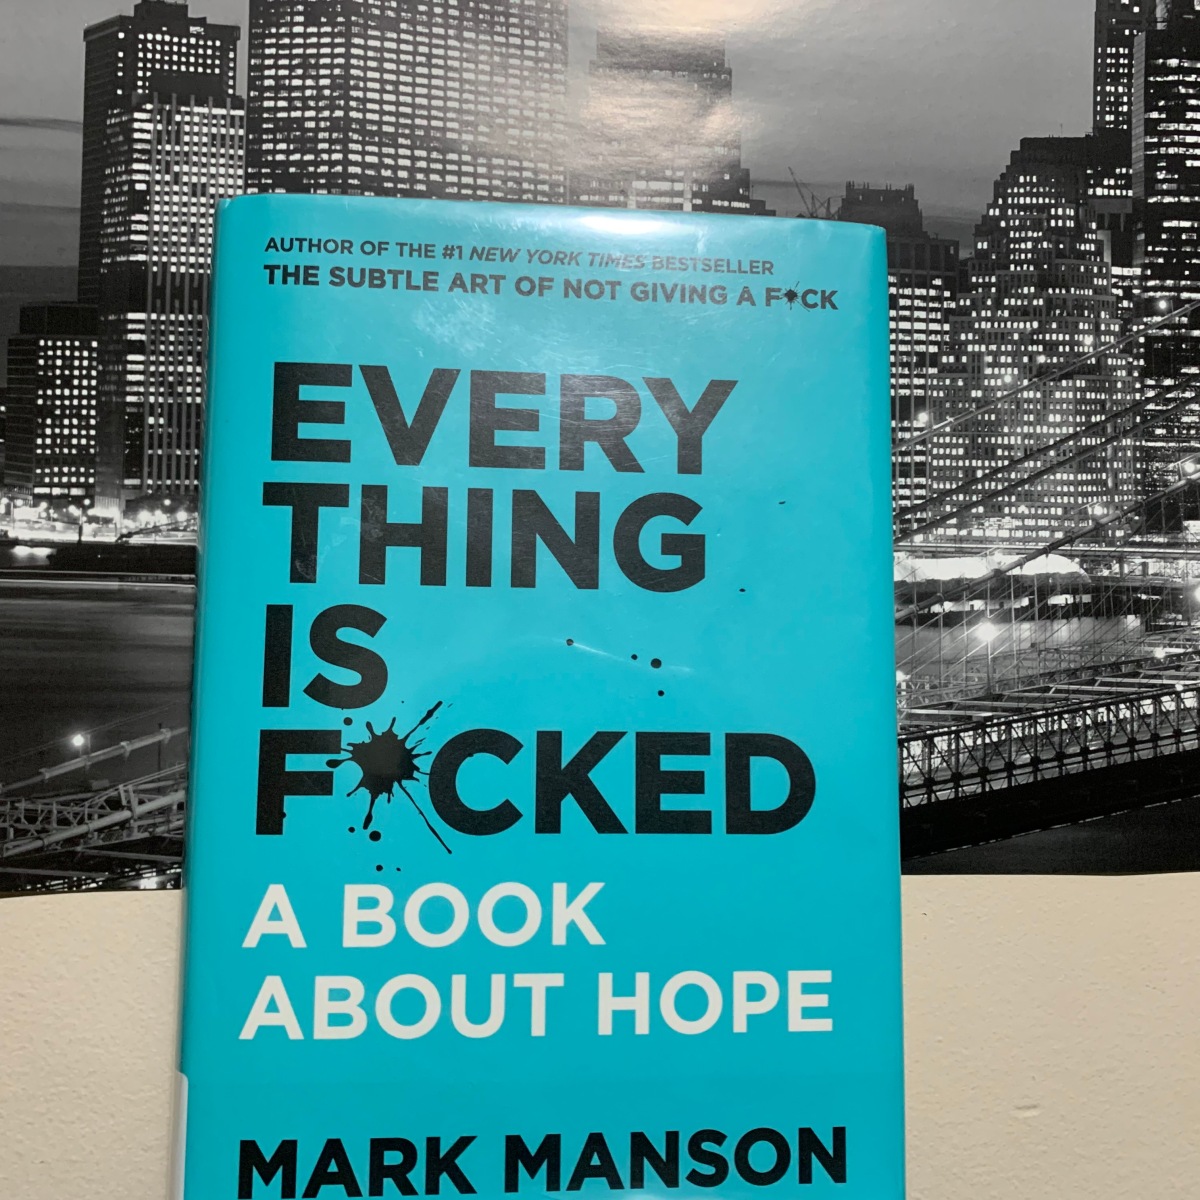 ‘Everything is F*cked’ by Mark Manson